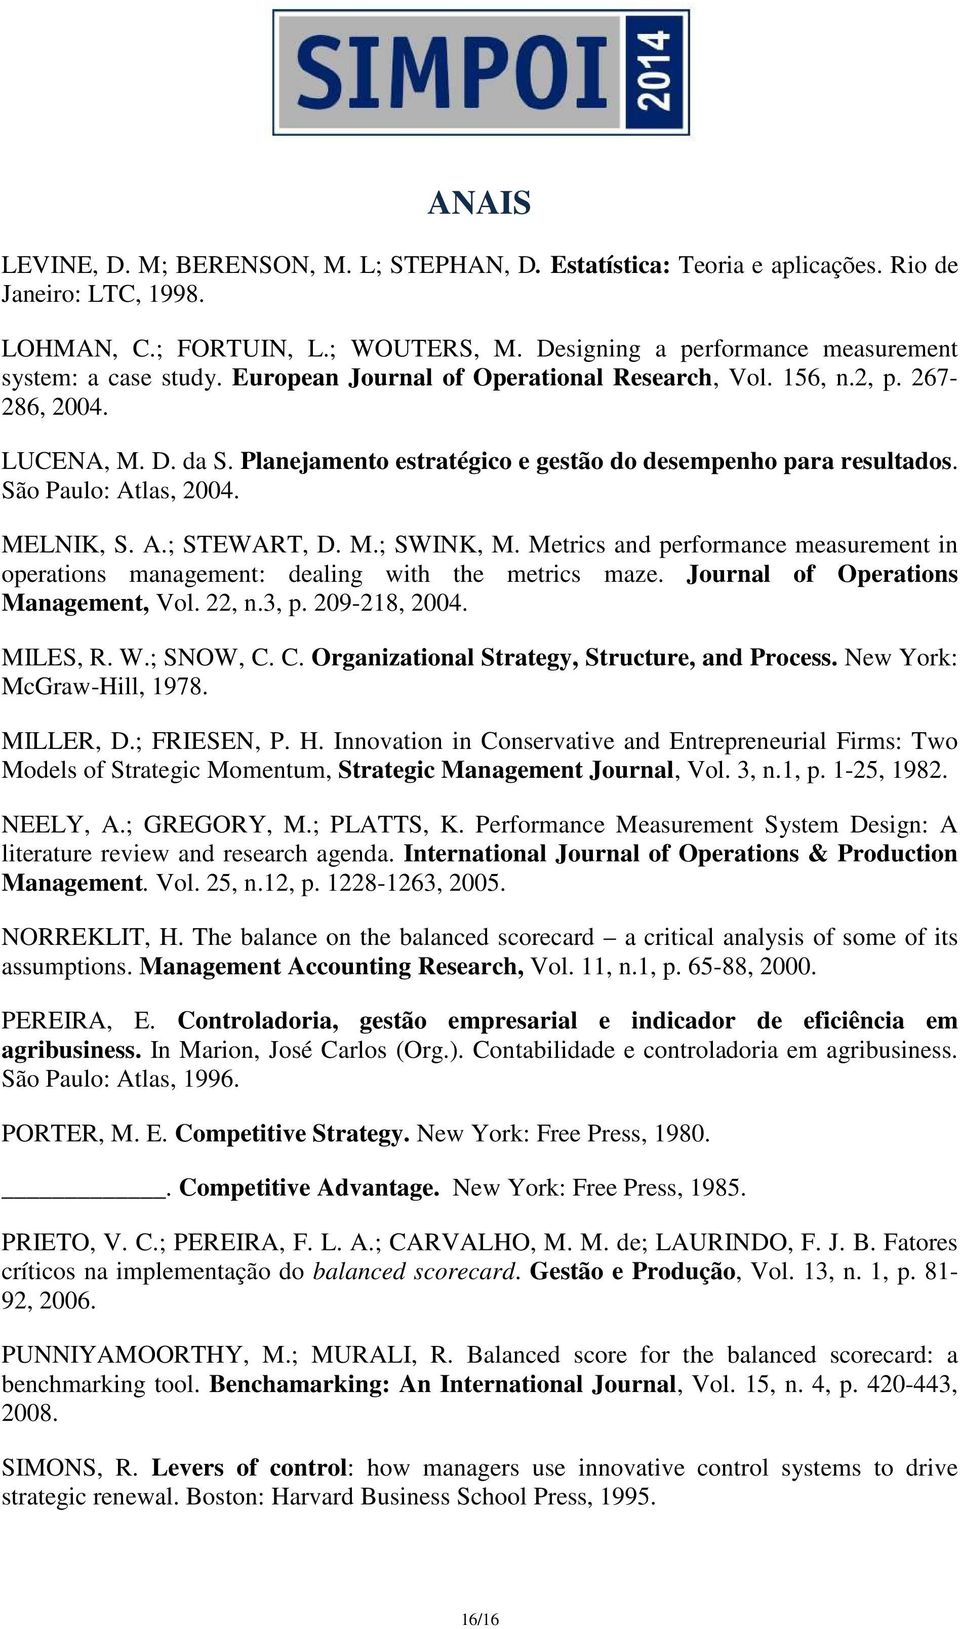 M.; SWINK, M. Metrics and performance measurement in operations management: dealing with the metrics maze. Journal of Operations Management, Vol. 22, n.3, p. 209-218, 2004. MILES, R. W.; SNOW, C.